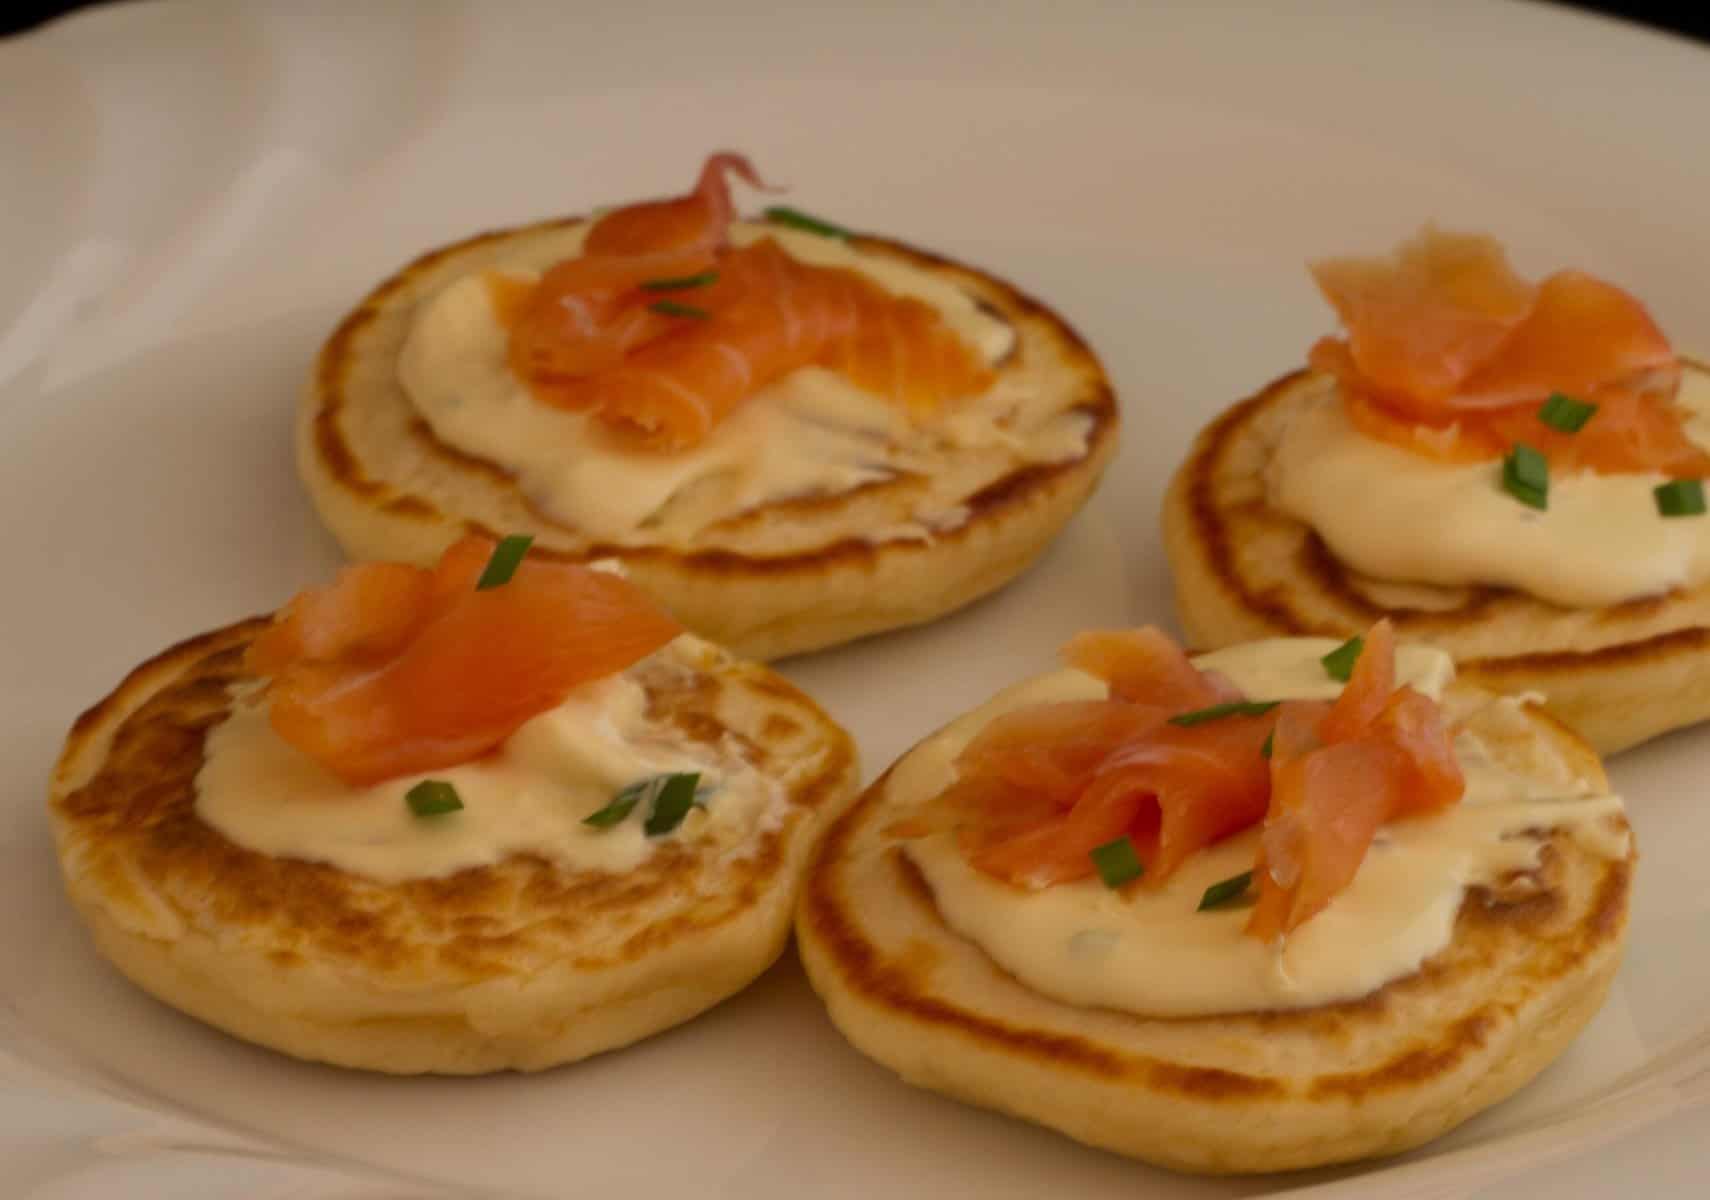  Get your brunch on with this delicious and indulgent smoked salmon pancake recipe.